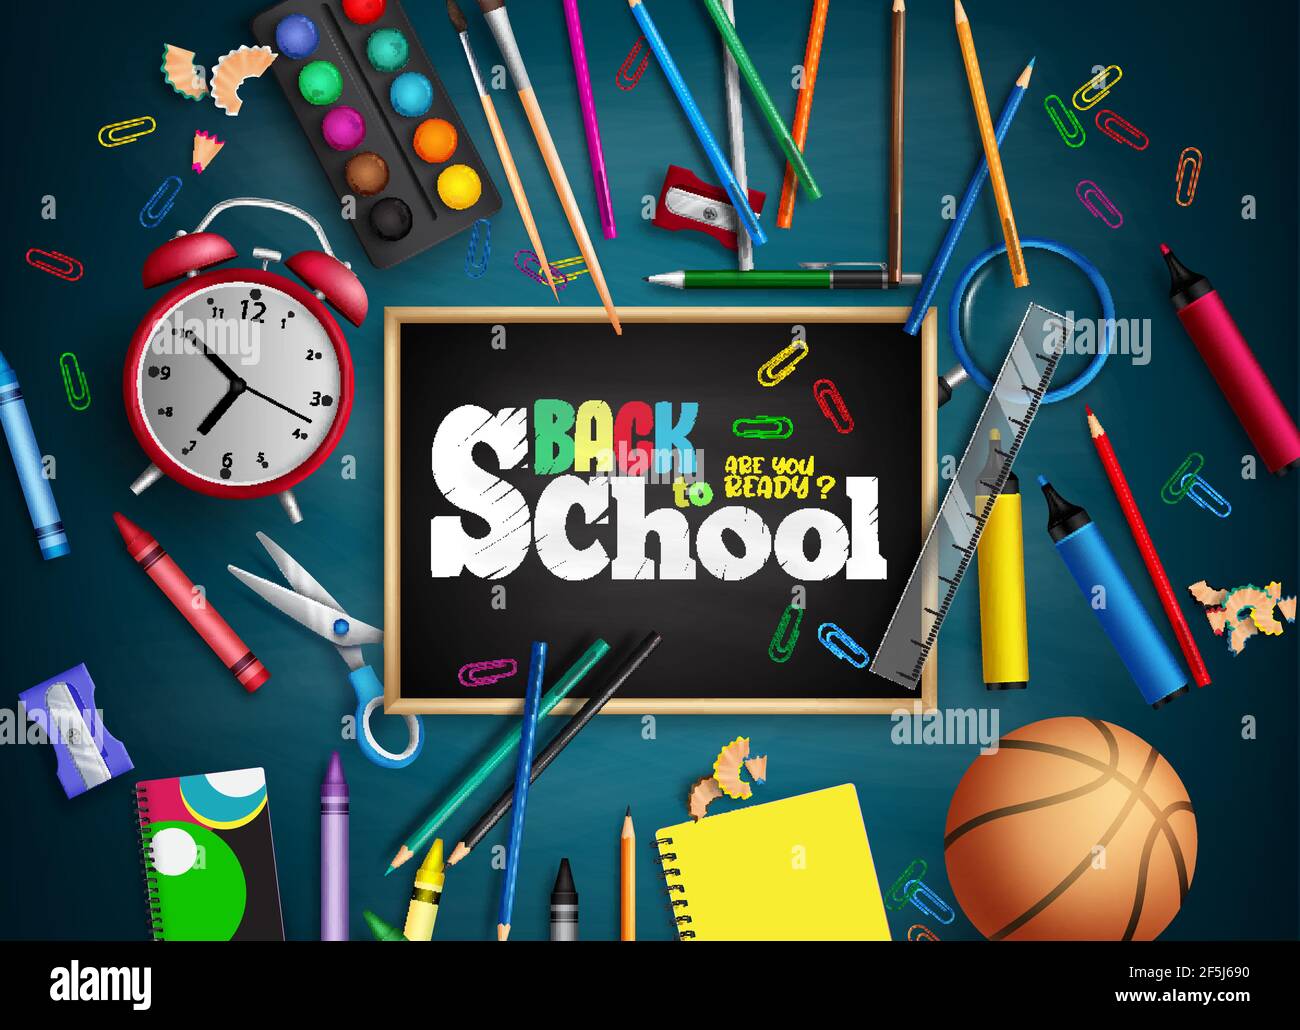 Back to school vector banner background. Back to school text with education activity objects like color pen, paint and basketball elements for student. Stock Vector